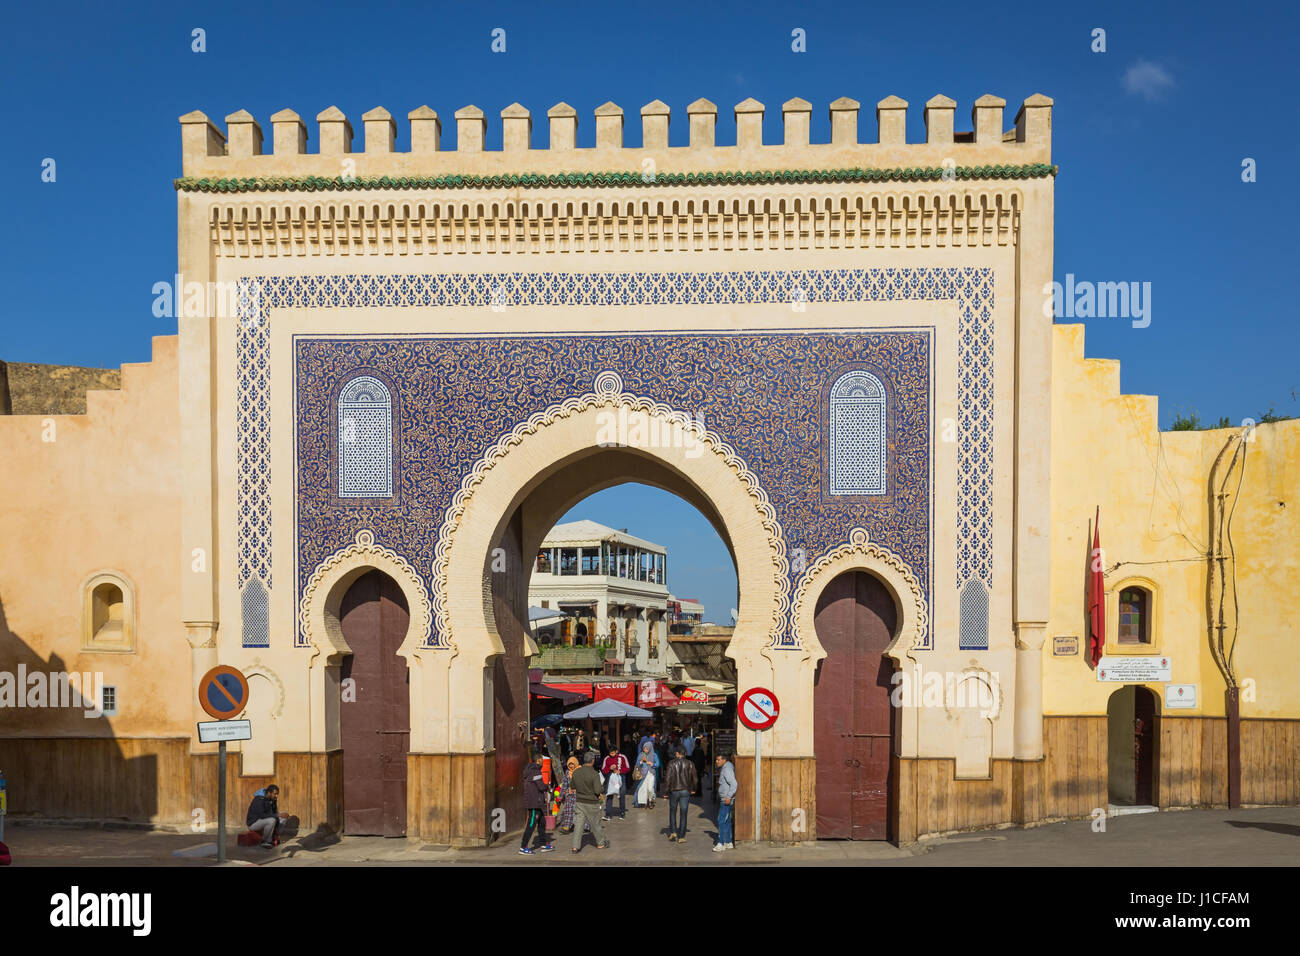 Fes, Morocco - February 28, 2017: Ancient Blue gate in old Medina Stock Photo